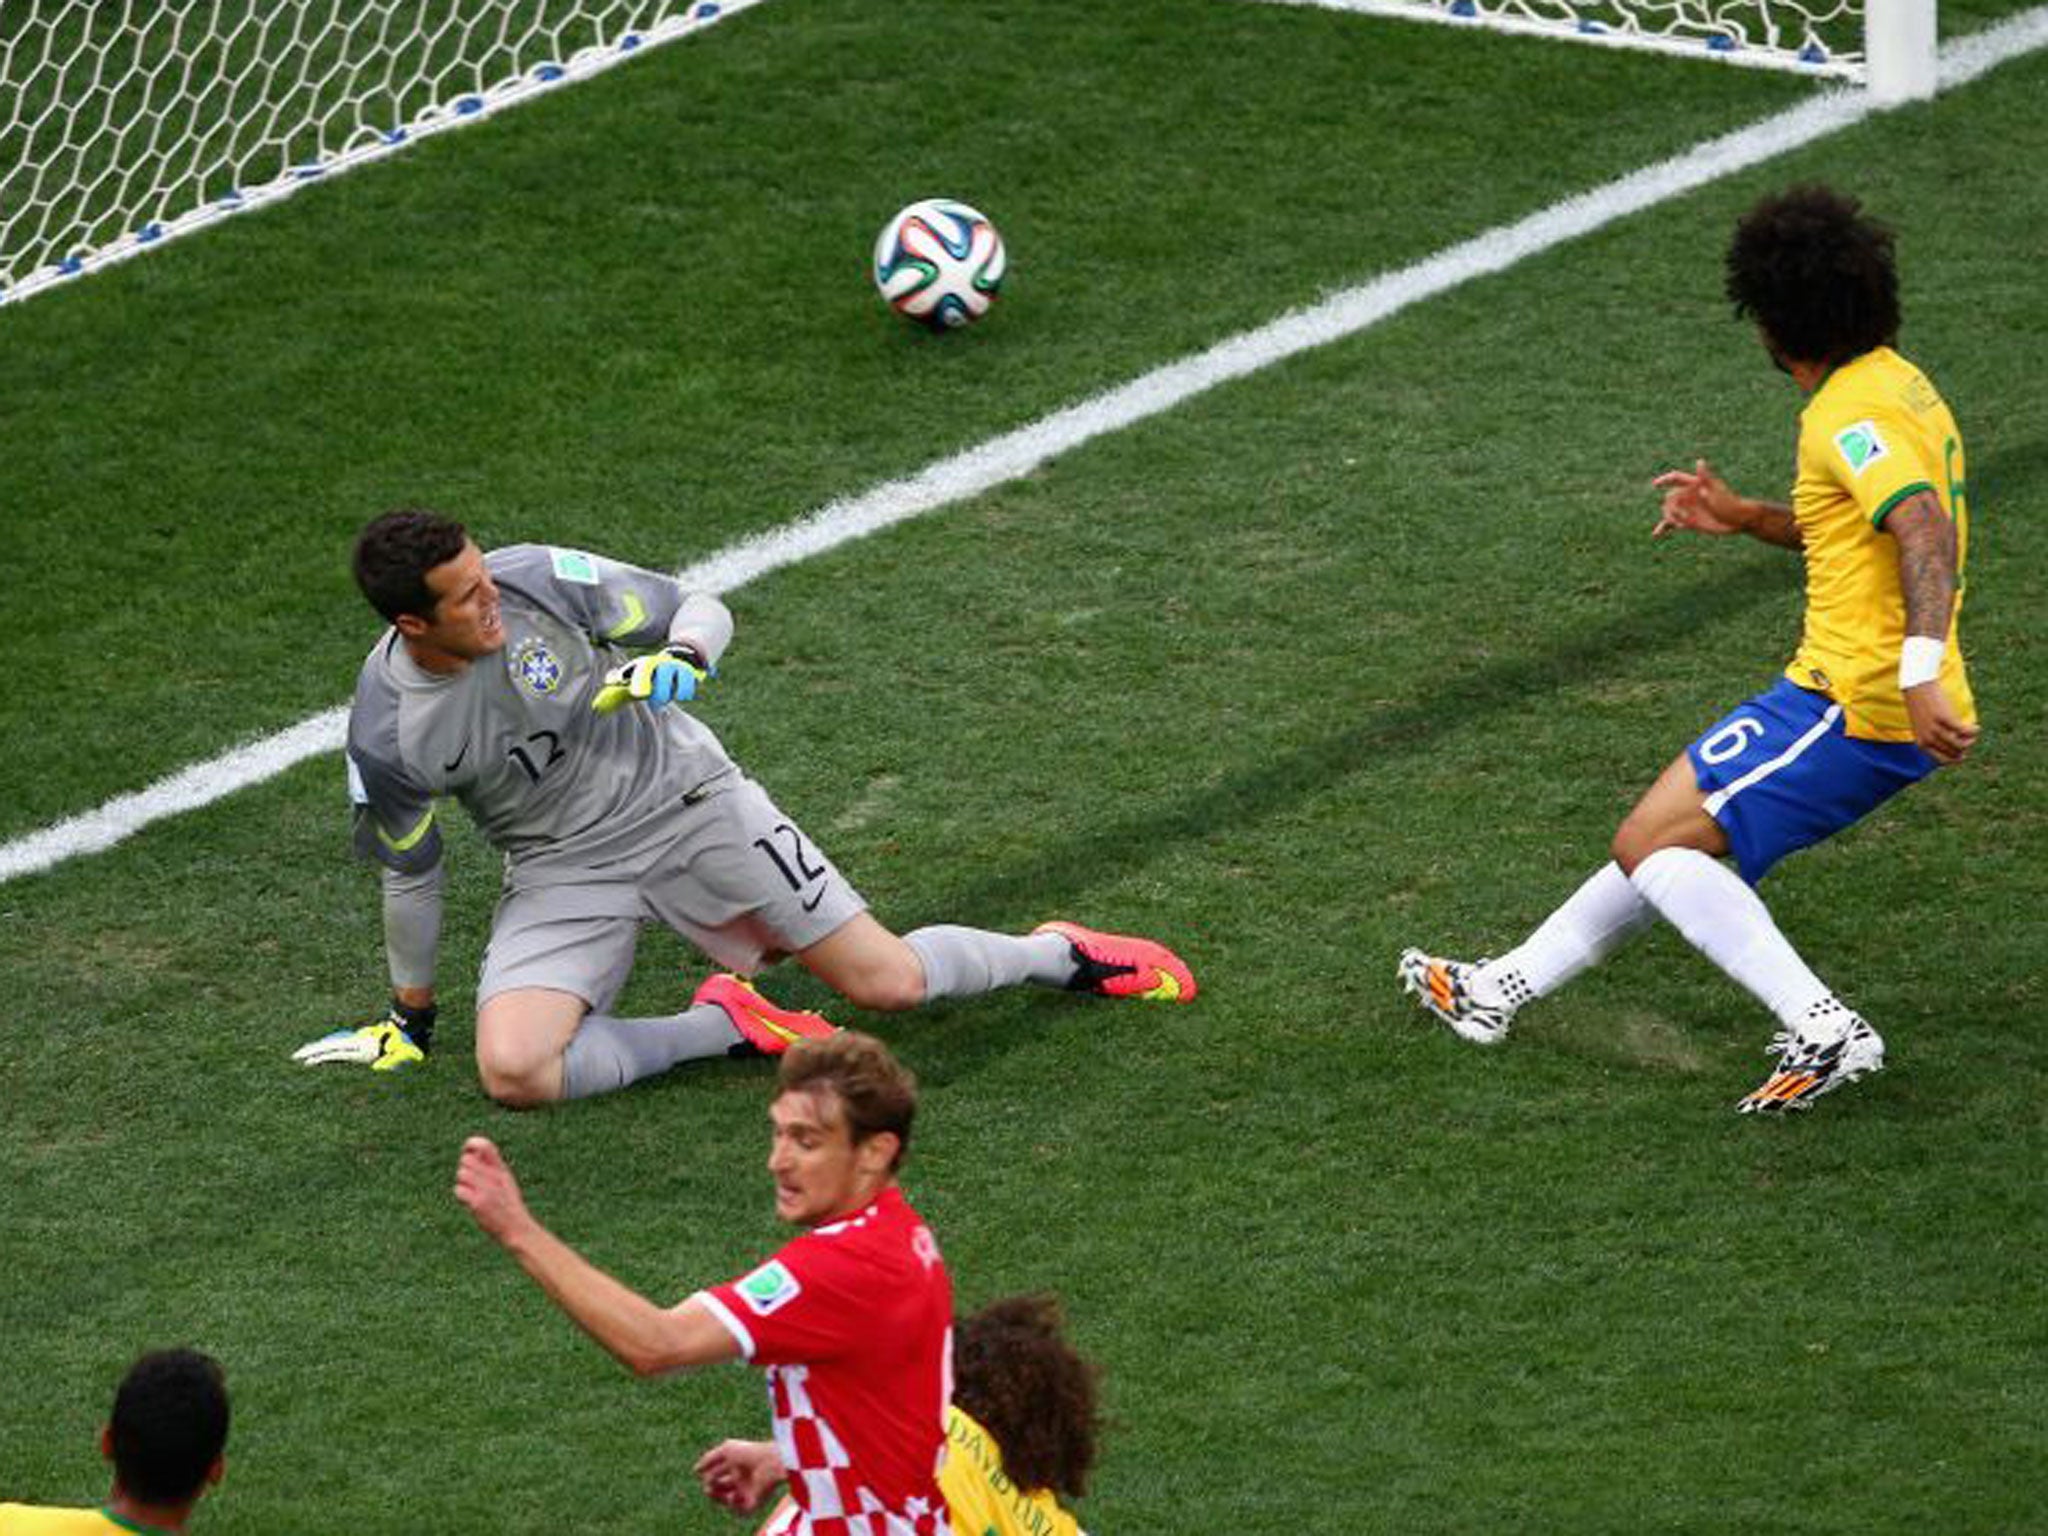 Marcelo deflects the ball past Julio Cesar to open the scoring for Croatia